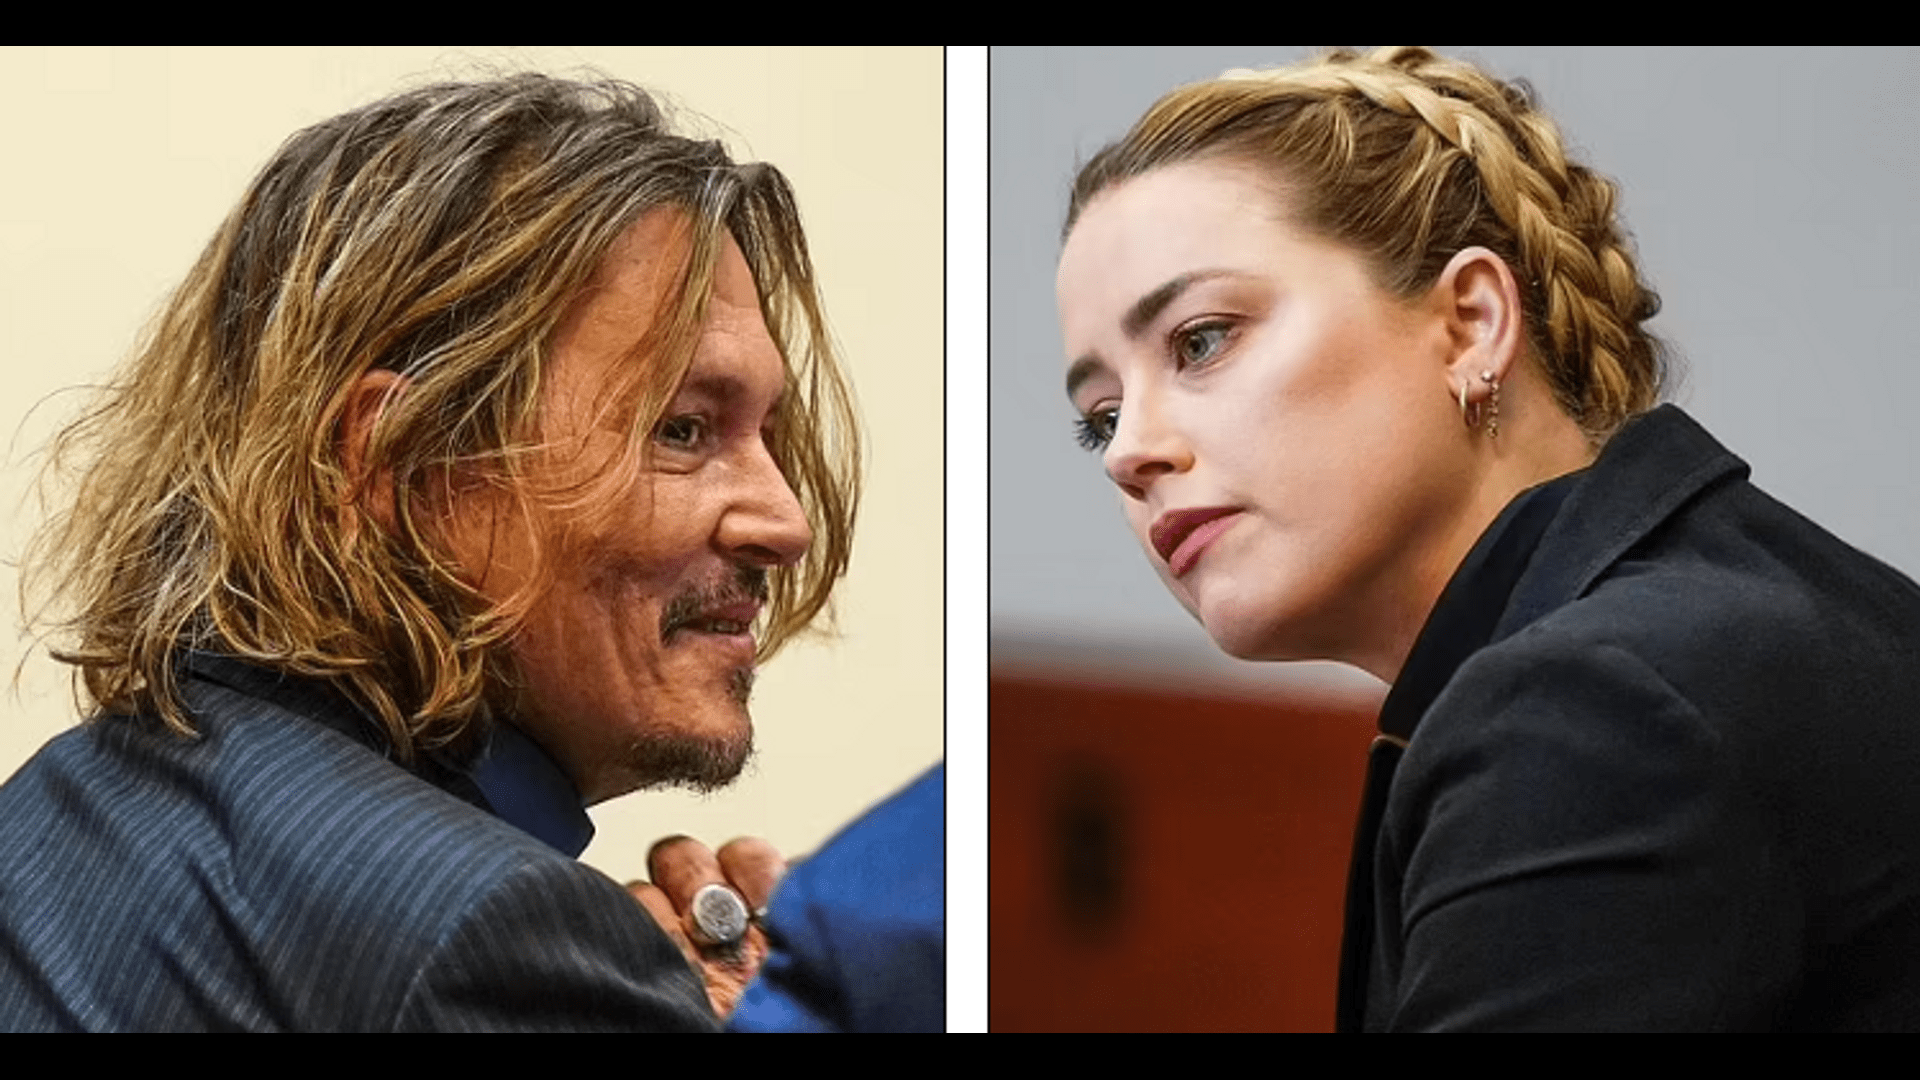 ”former-assistant-amber-heard-says-the-actress-has-always-been-aggressive”